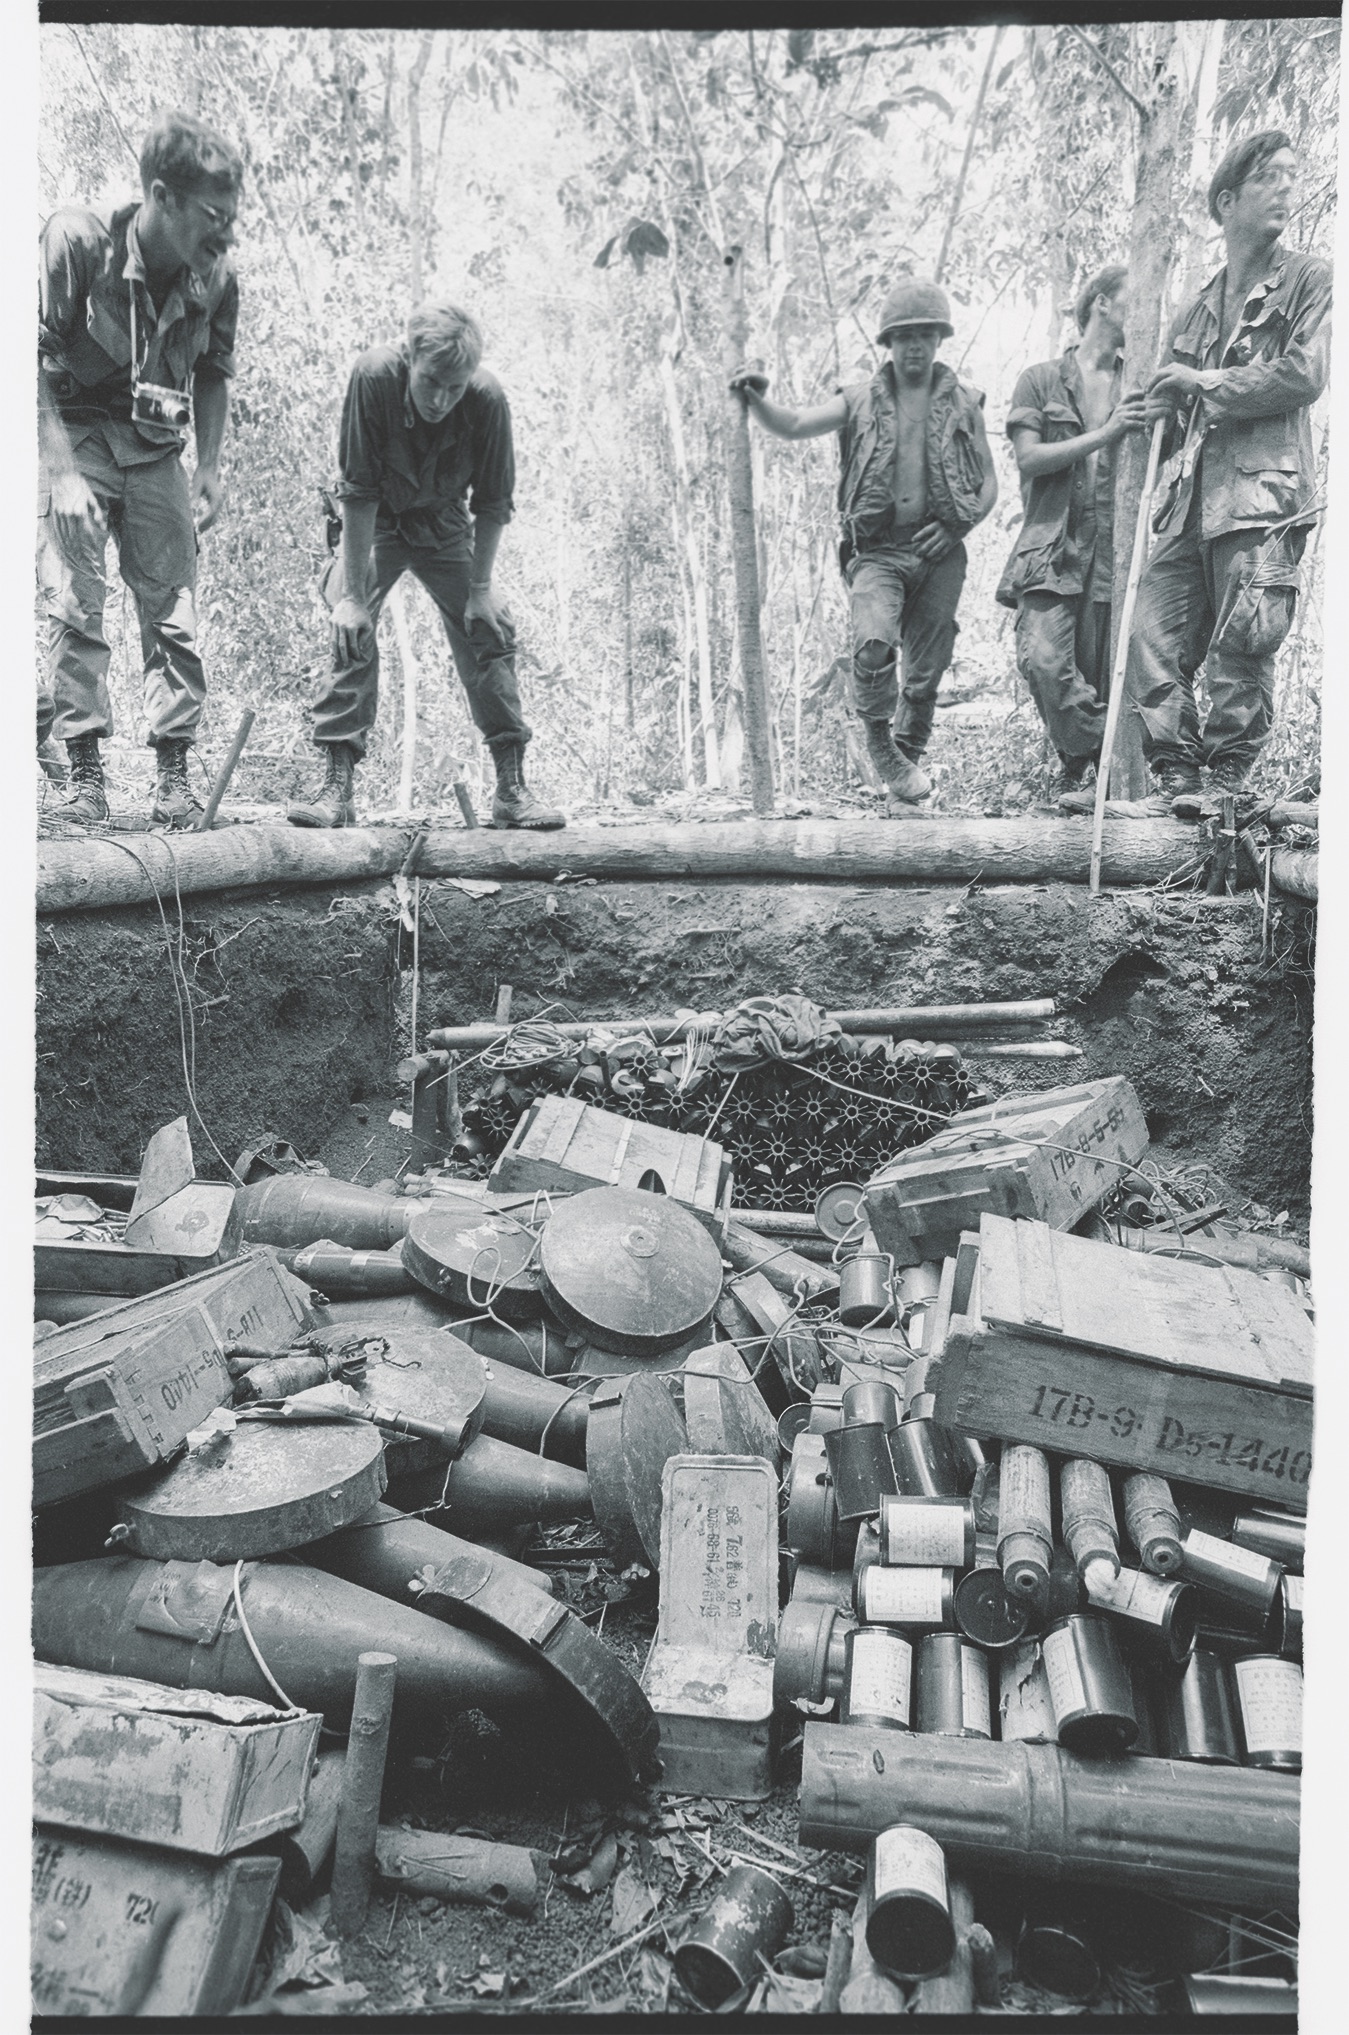 A pit filled with communist supplies, including rockets and mortar shells, is discovered on May 3 in the Fishhook area by 11th Armored Cavalry troops.